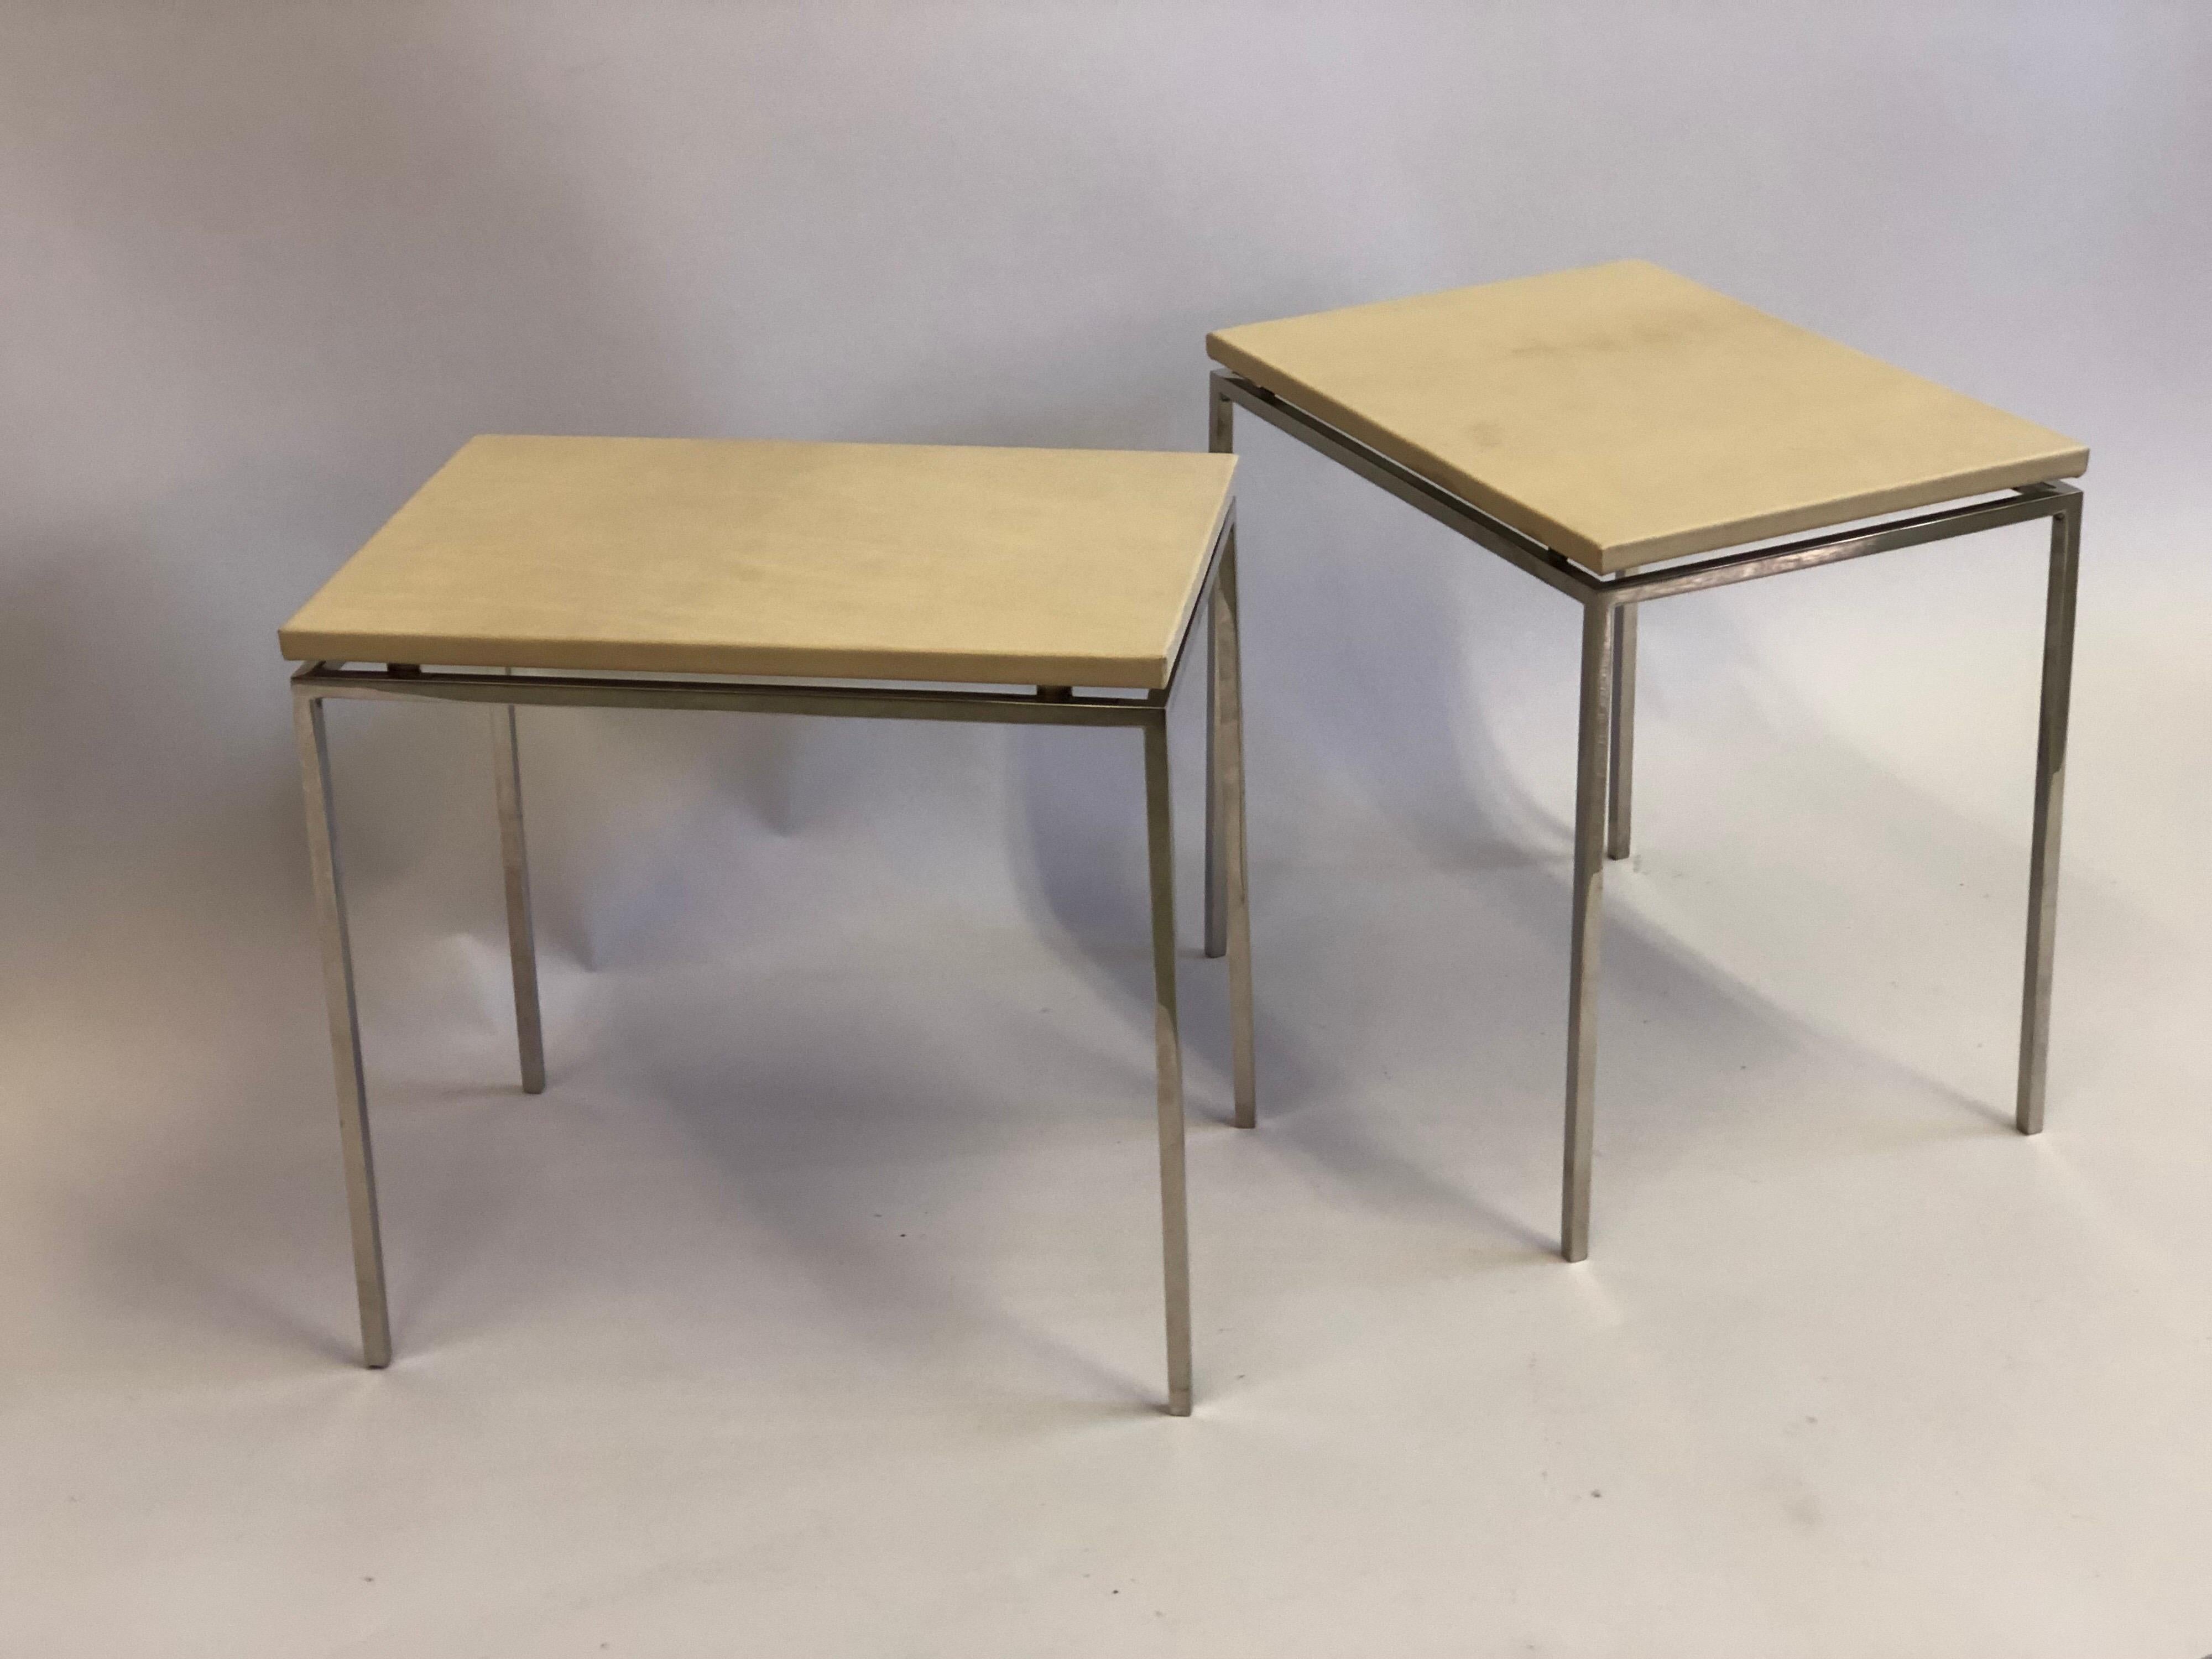 Elegant pair of French Mid-Century Modern cantilevered nickel and parchment leather side / end tables / gueridon attributed to Maison Ramsay. 

The pieces feature delicate nickel metal frames with tops of parchment leather cantilevered above them.